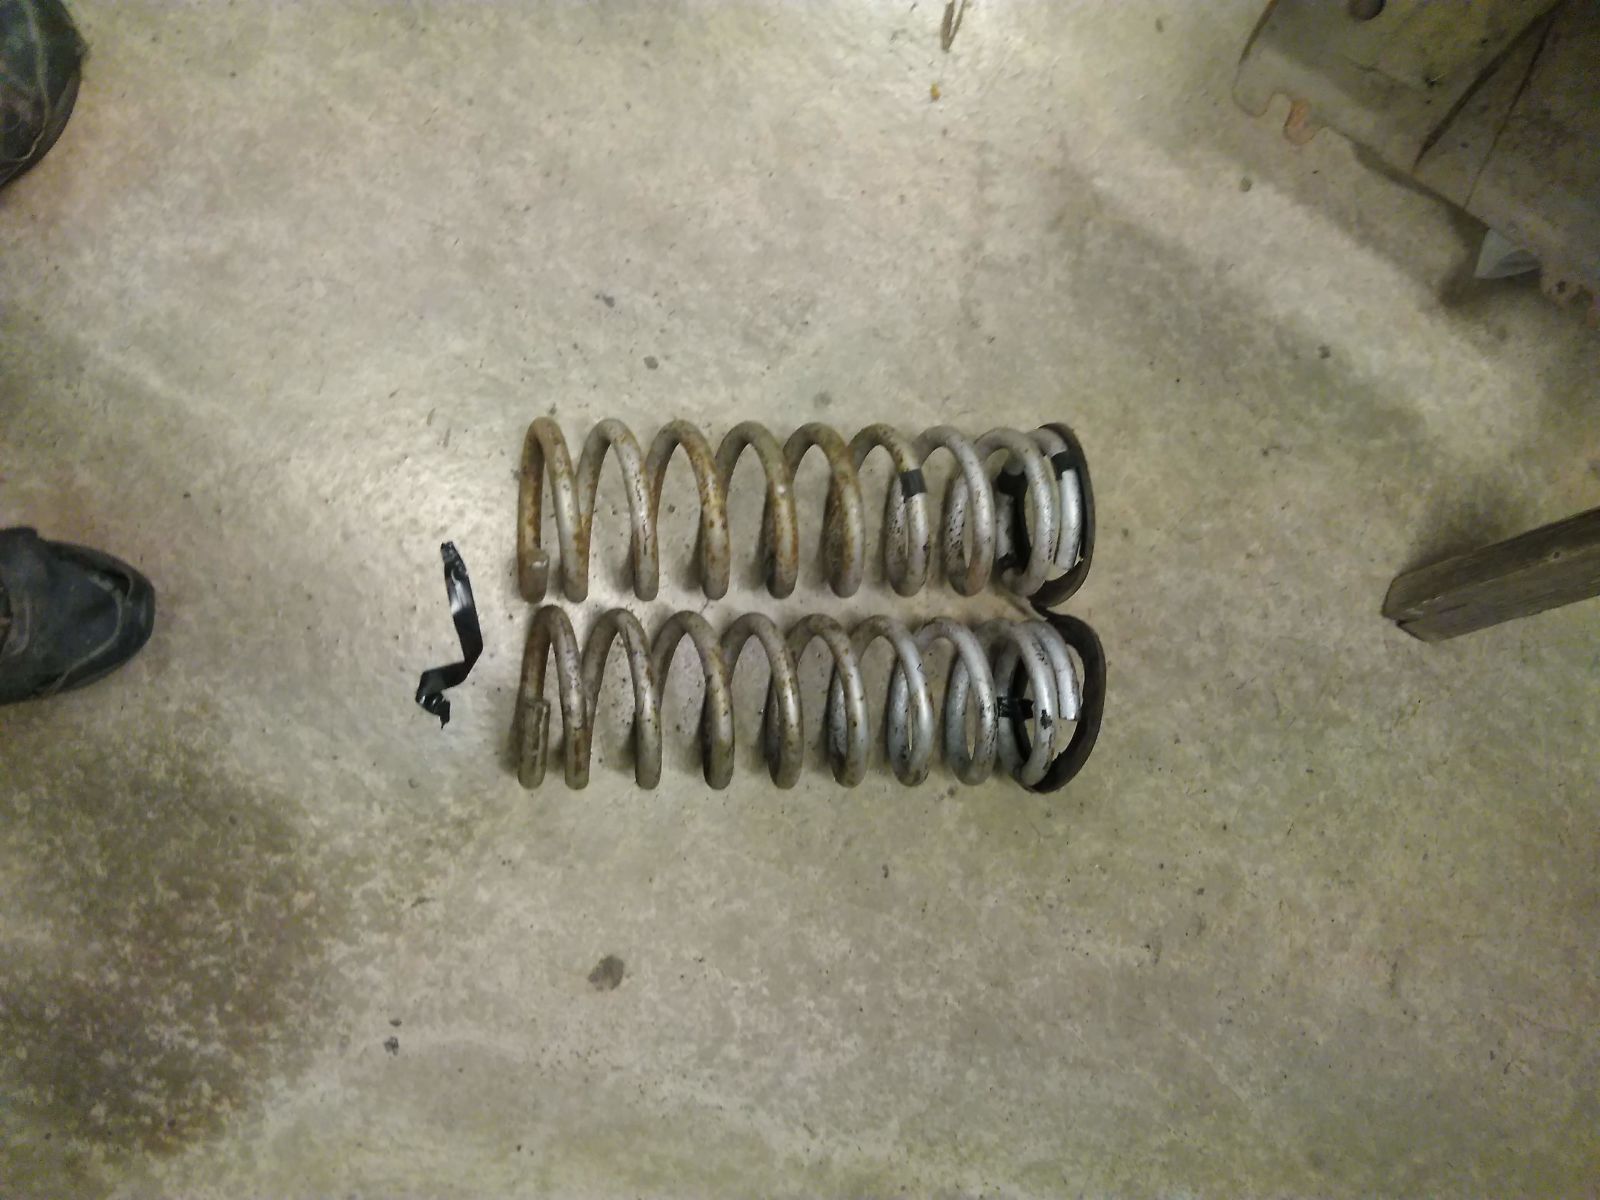 Original springs were in good condition, so they would be re-used but cut off 2.5 turns